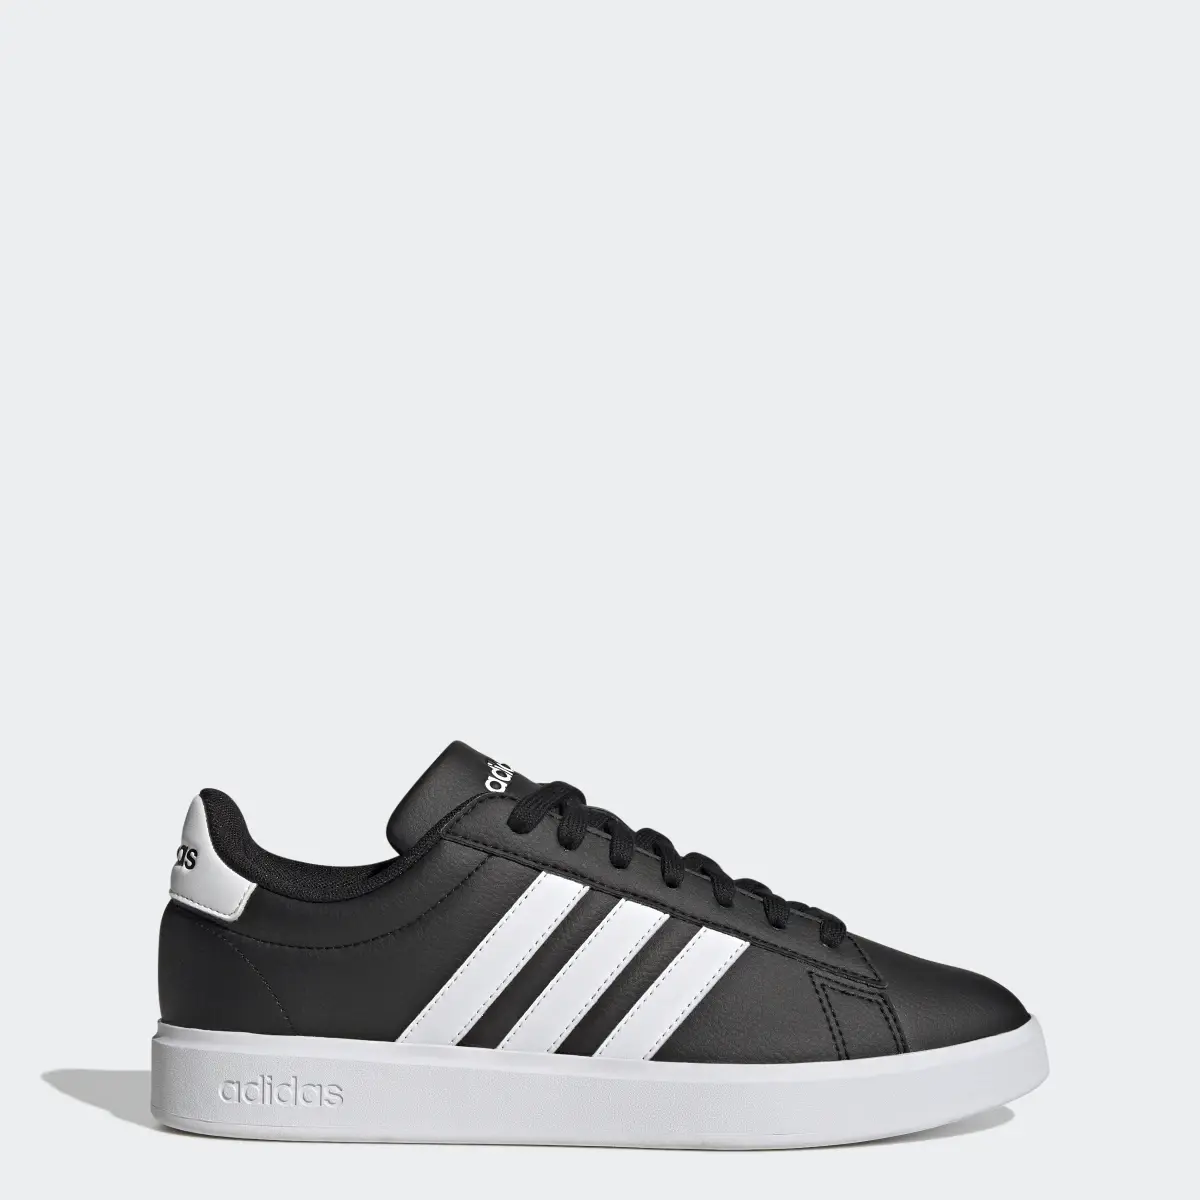 Adidas Grand Court Shoes. 1